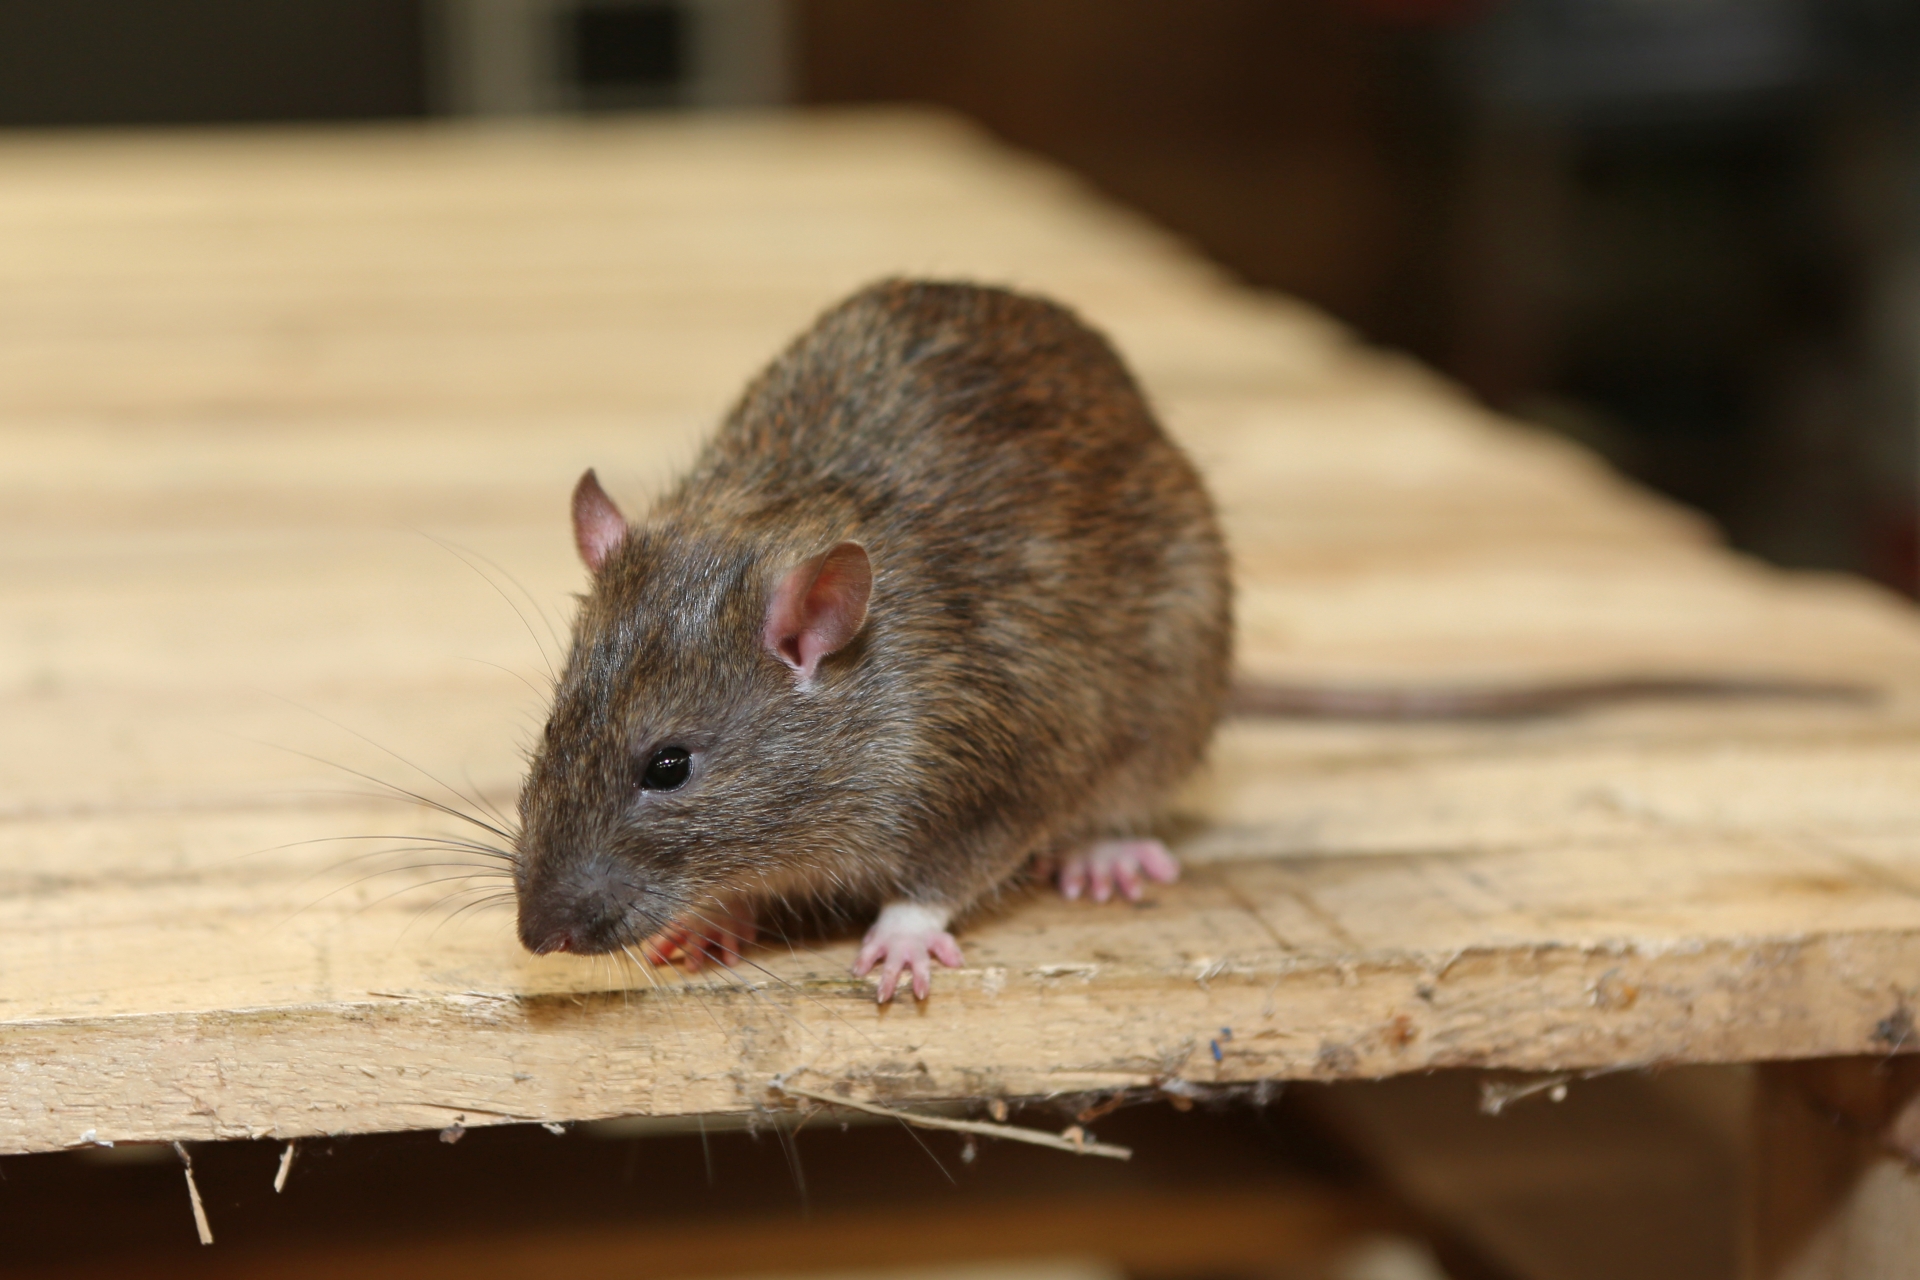 Rat Infestation, Pest Control in South Norwood, SE25. Call Now 020 8166 9746